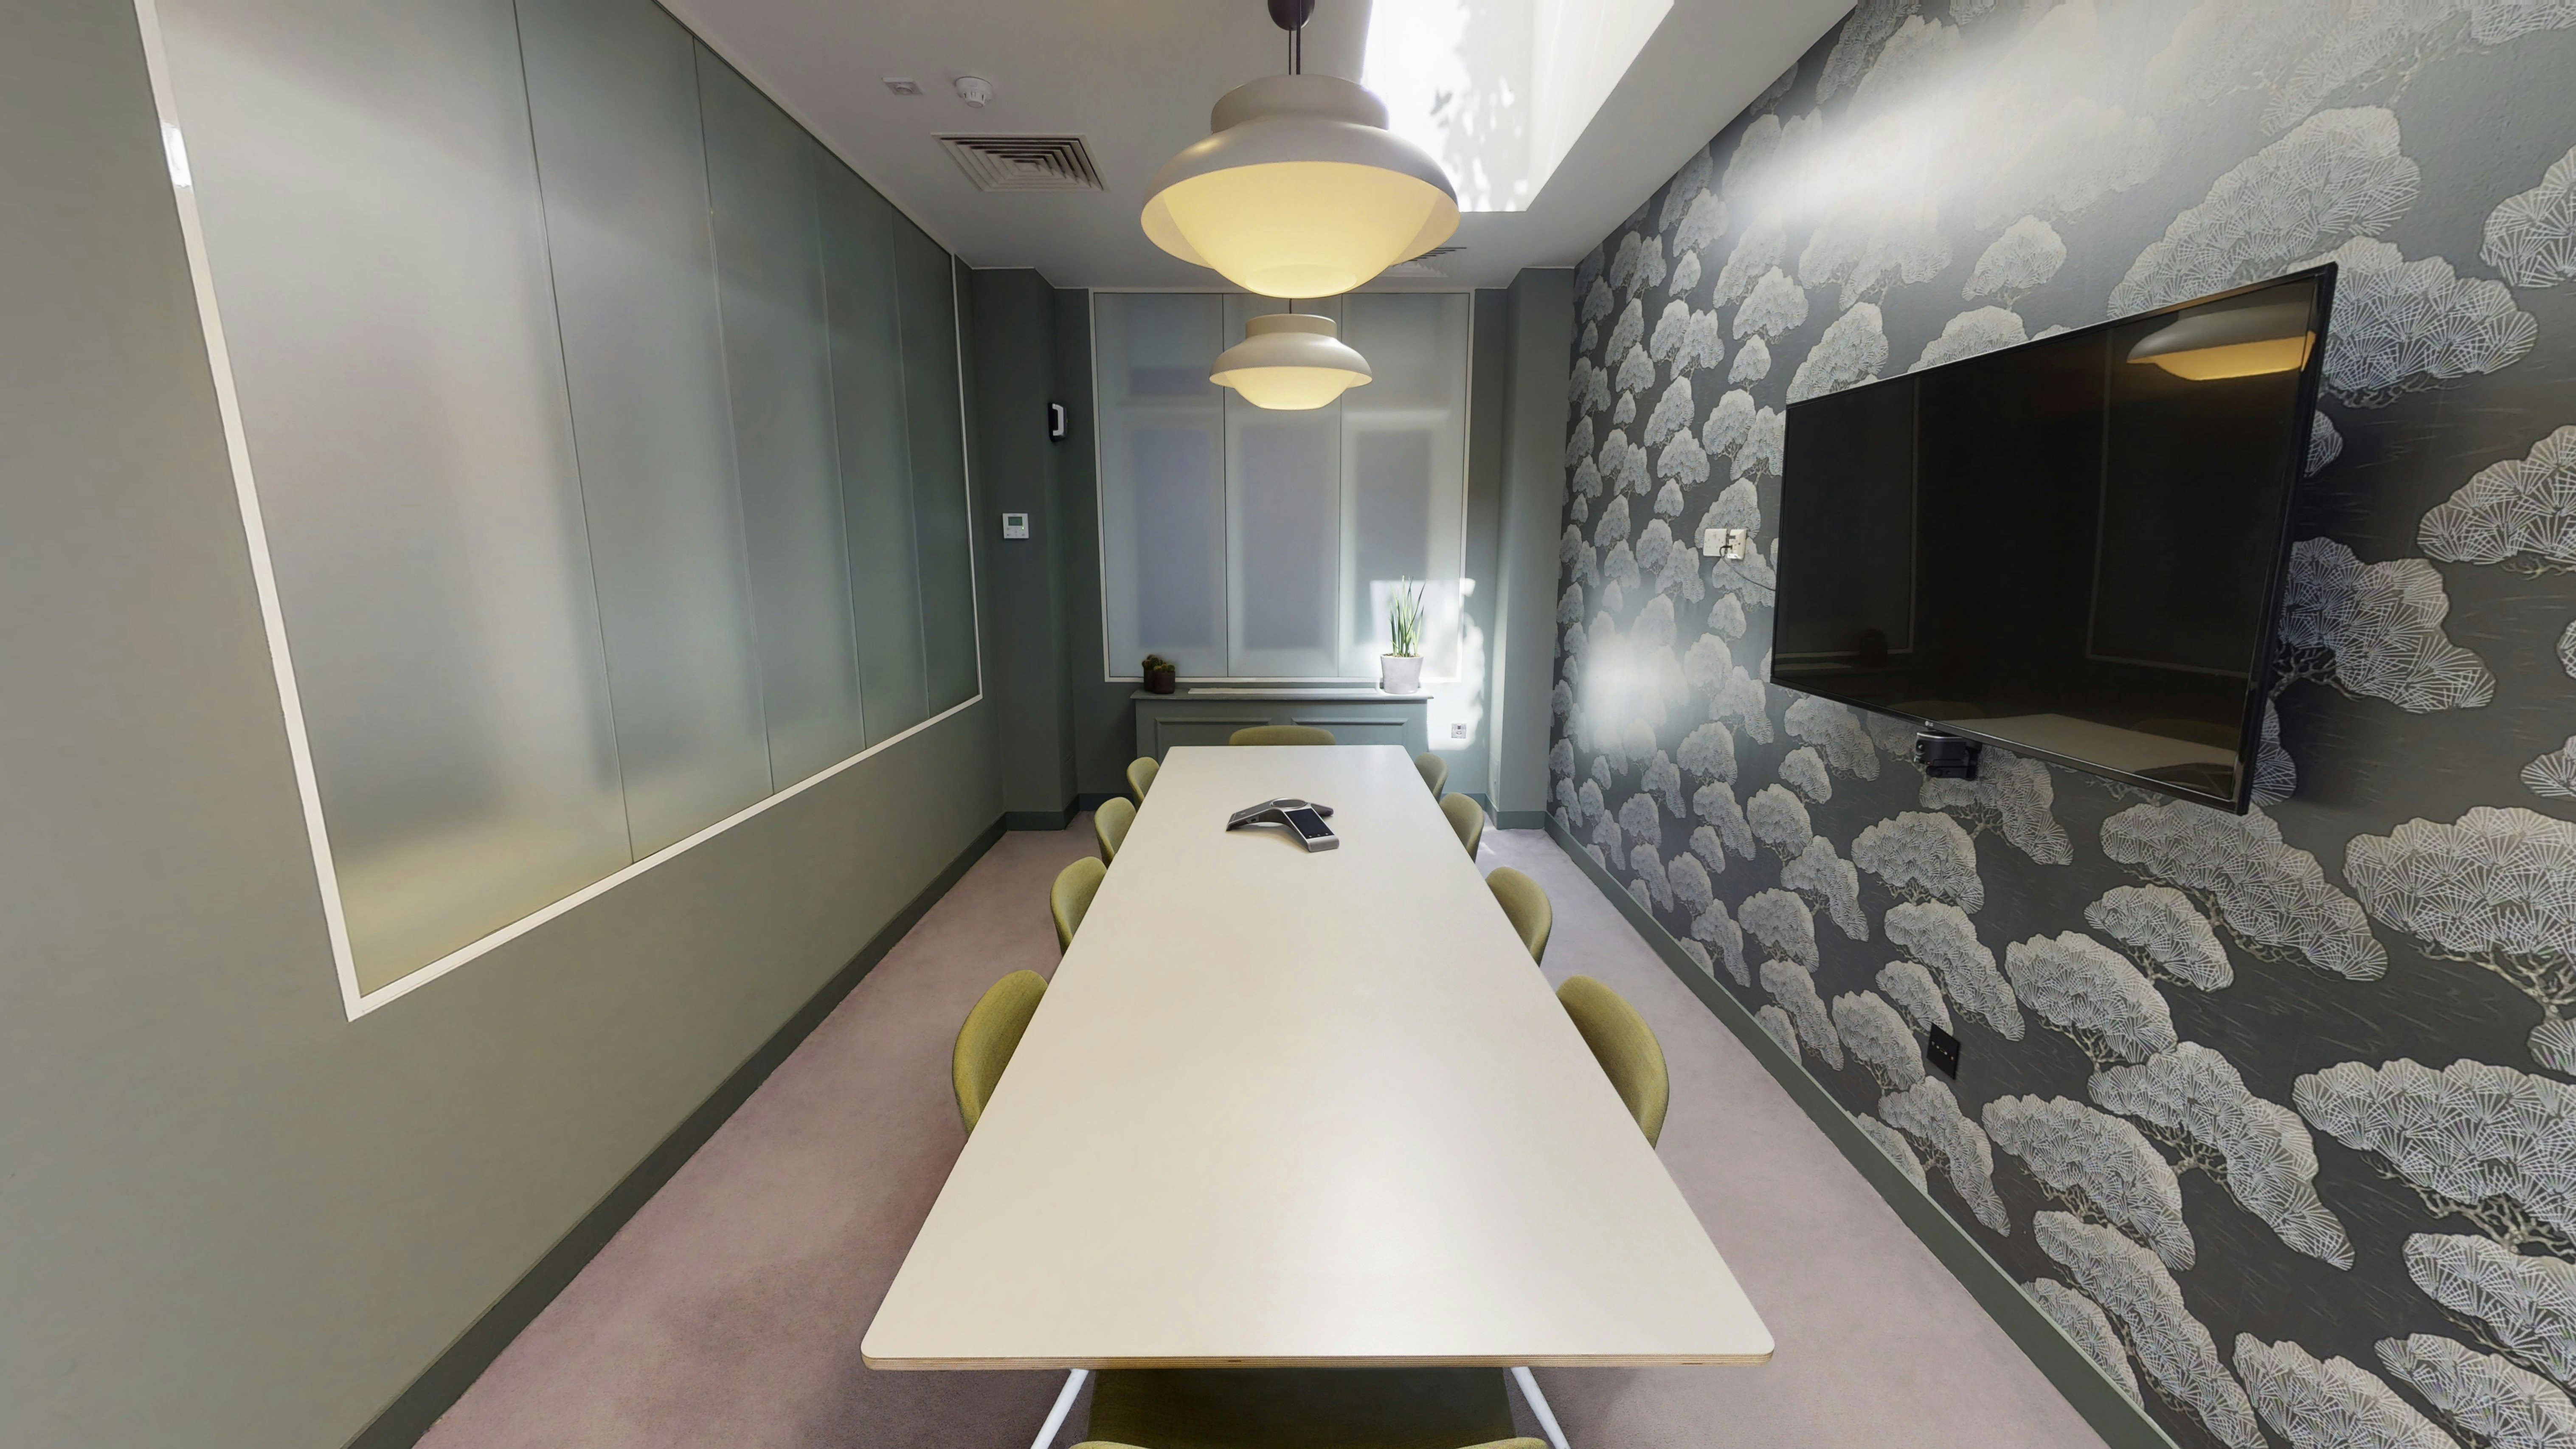 Meeting Rooms Venues in North London - The Office Group Mayfair